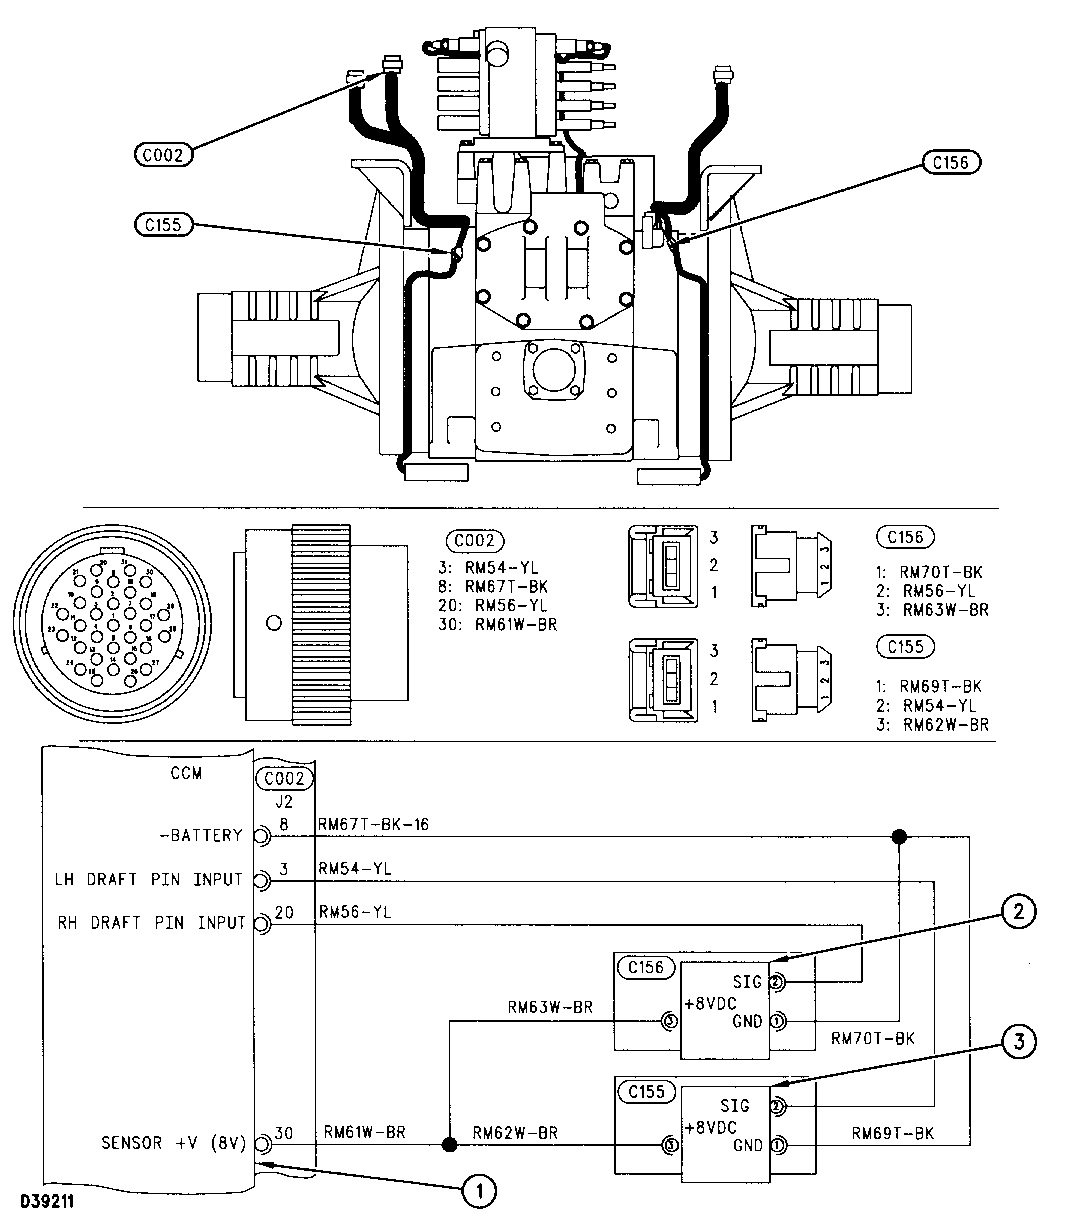 cat challenger 55 service manual